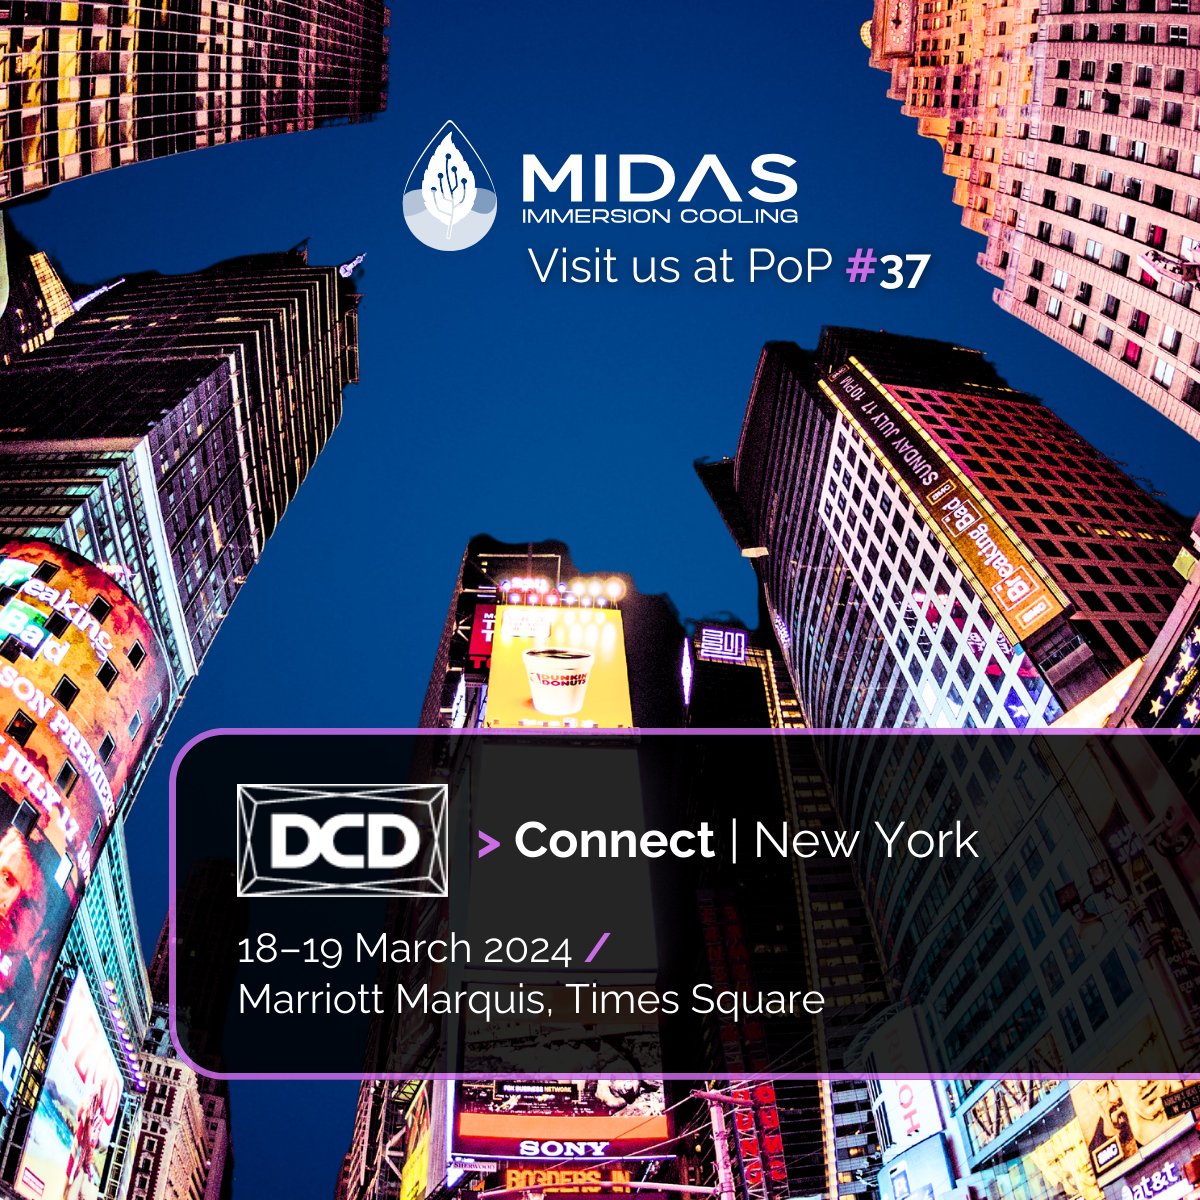 Countdown to #DCDConnectNewYork is on! Want to explore how #ImmersionCooling can transform your hardware's performance and longevity? Don't miss out on this opportunity to cool your tech the smart way!. Meet us at stand #37 this march 18 & 19